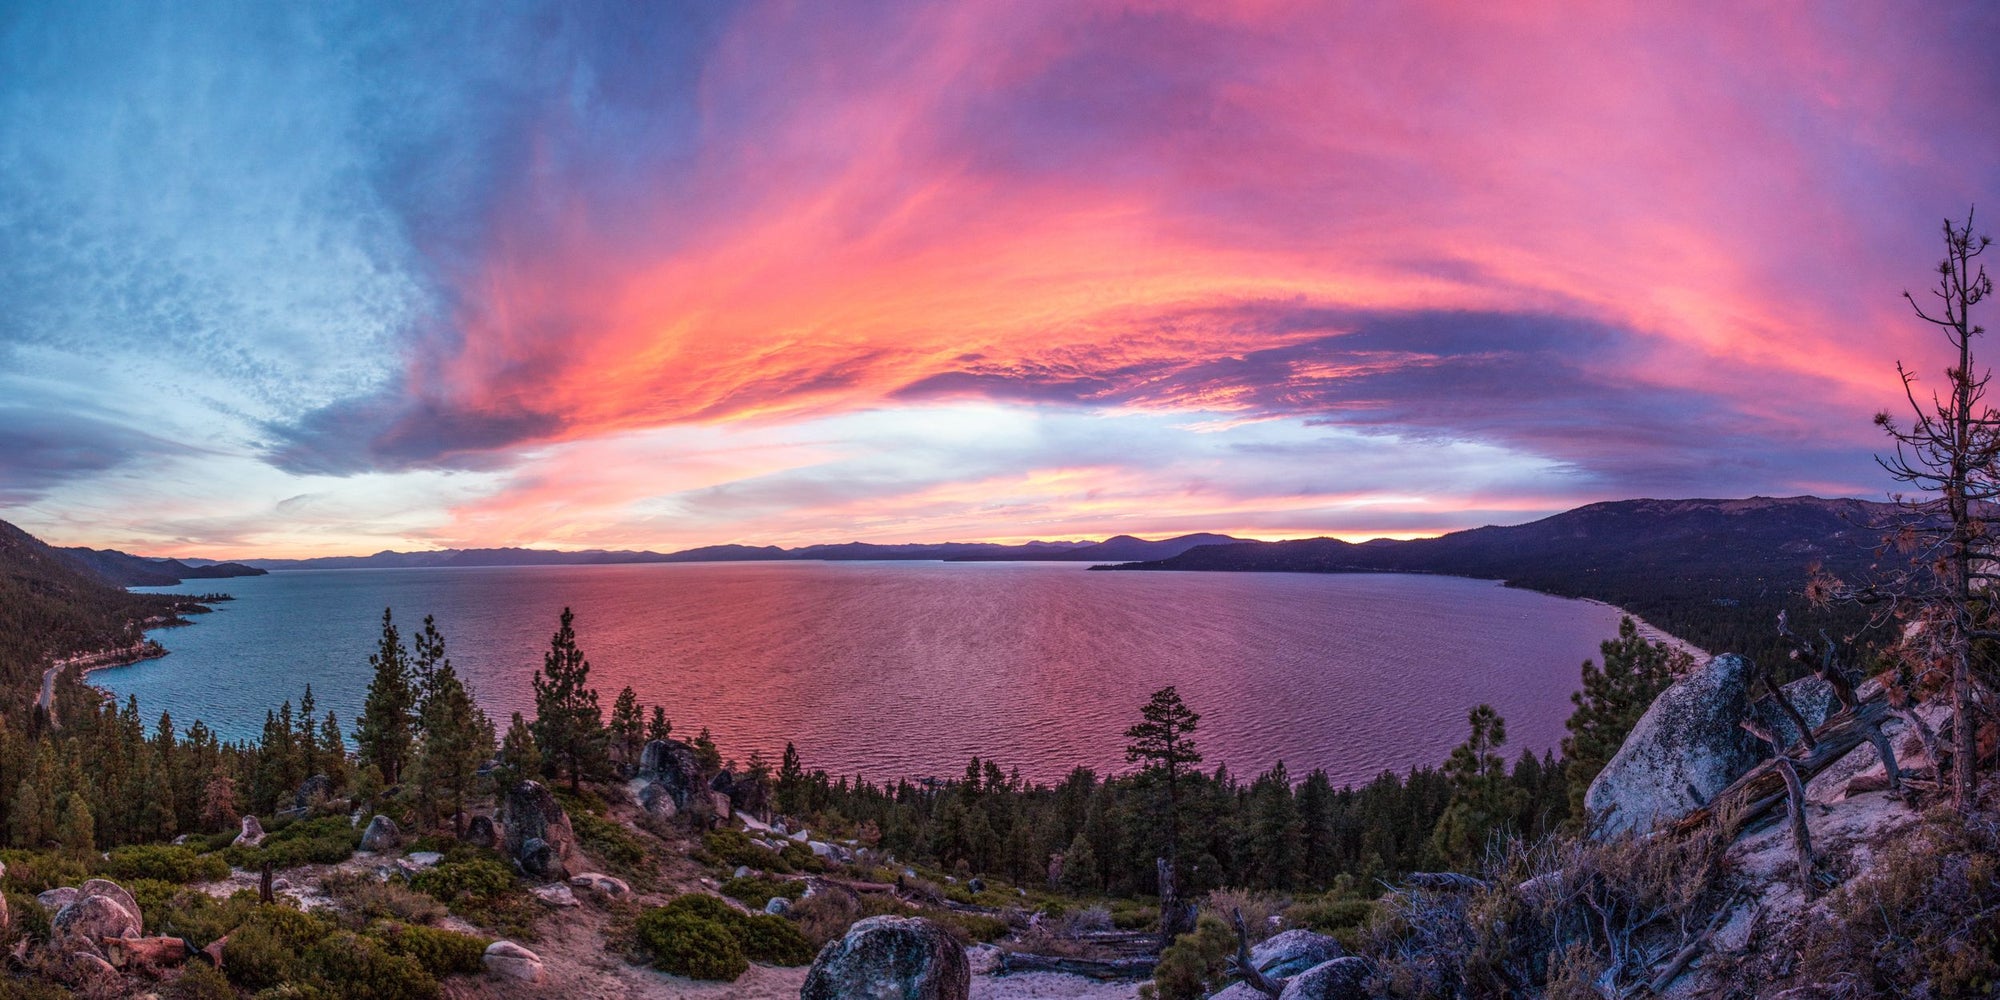 A pink, purple and blue sunset above Lake Tahoe with granite rocks and pine trees.